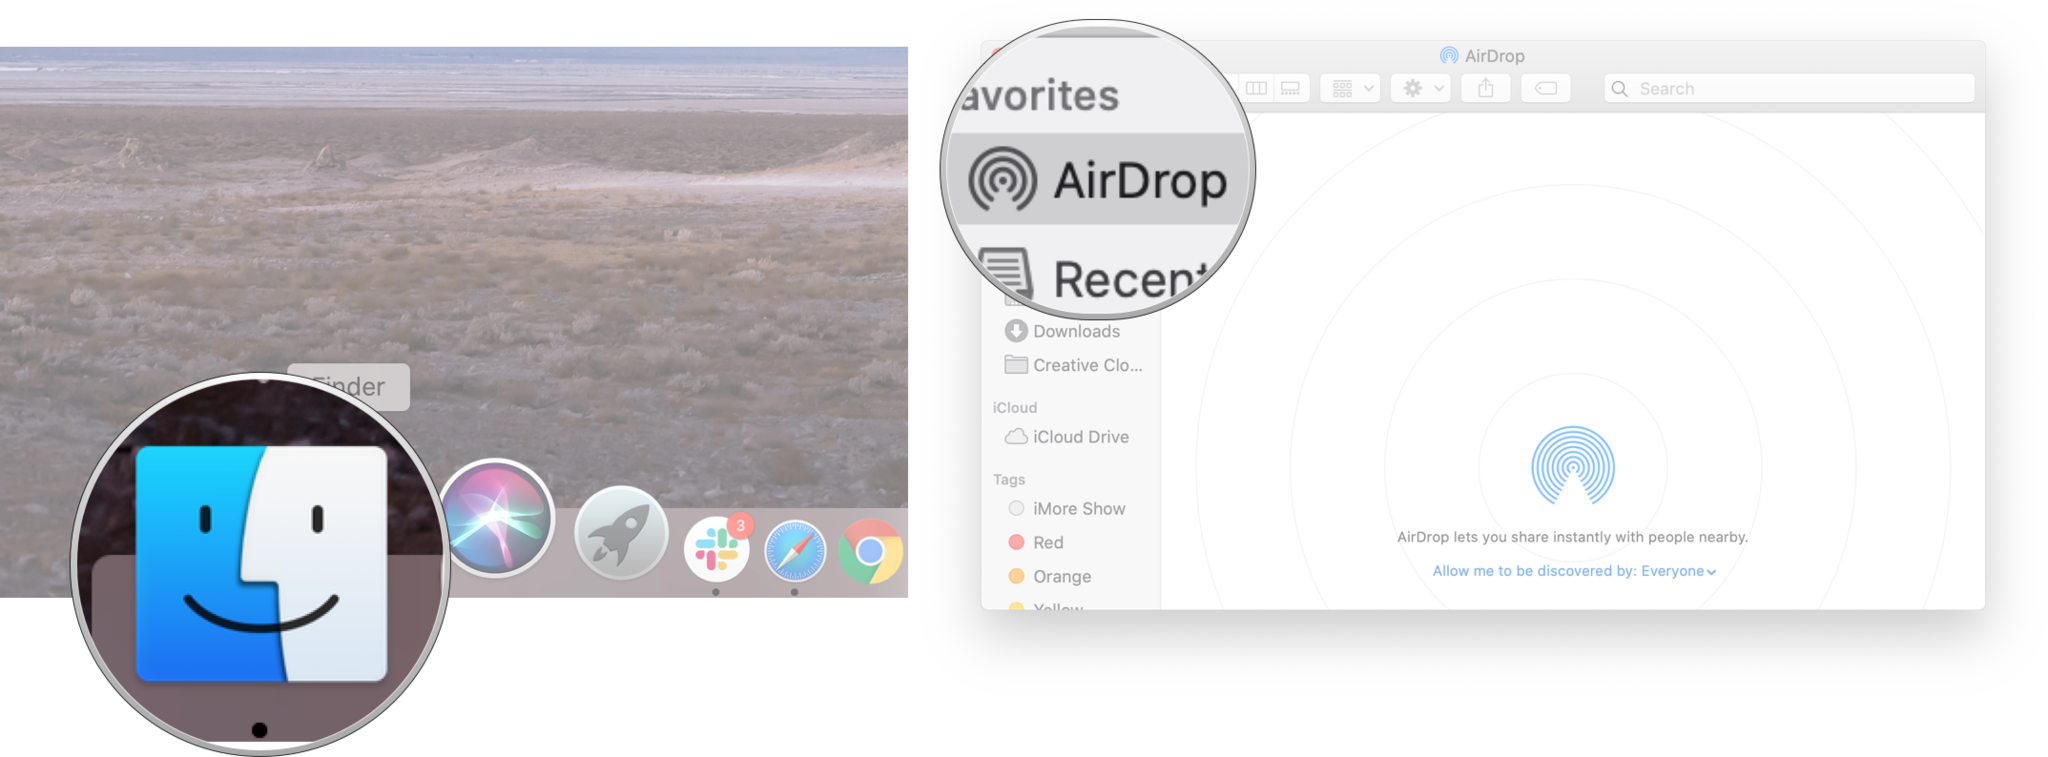 Launch Finder and then click on AirDrop.